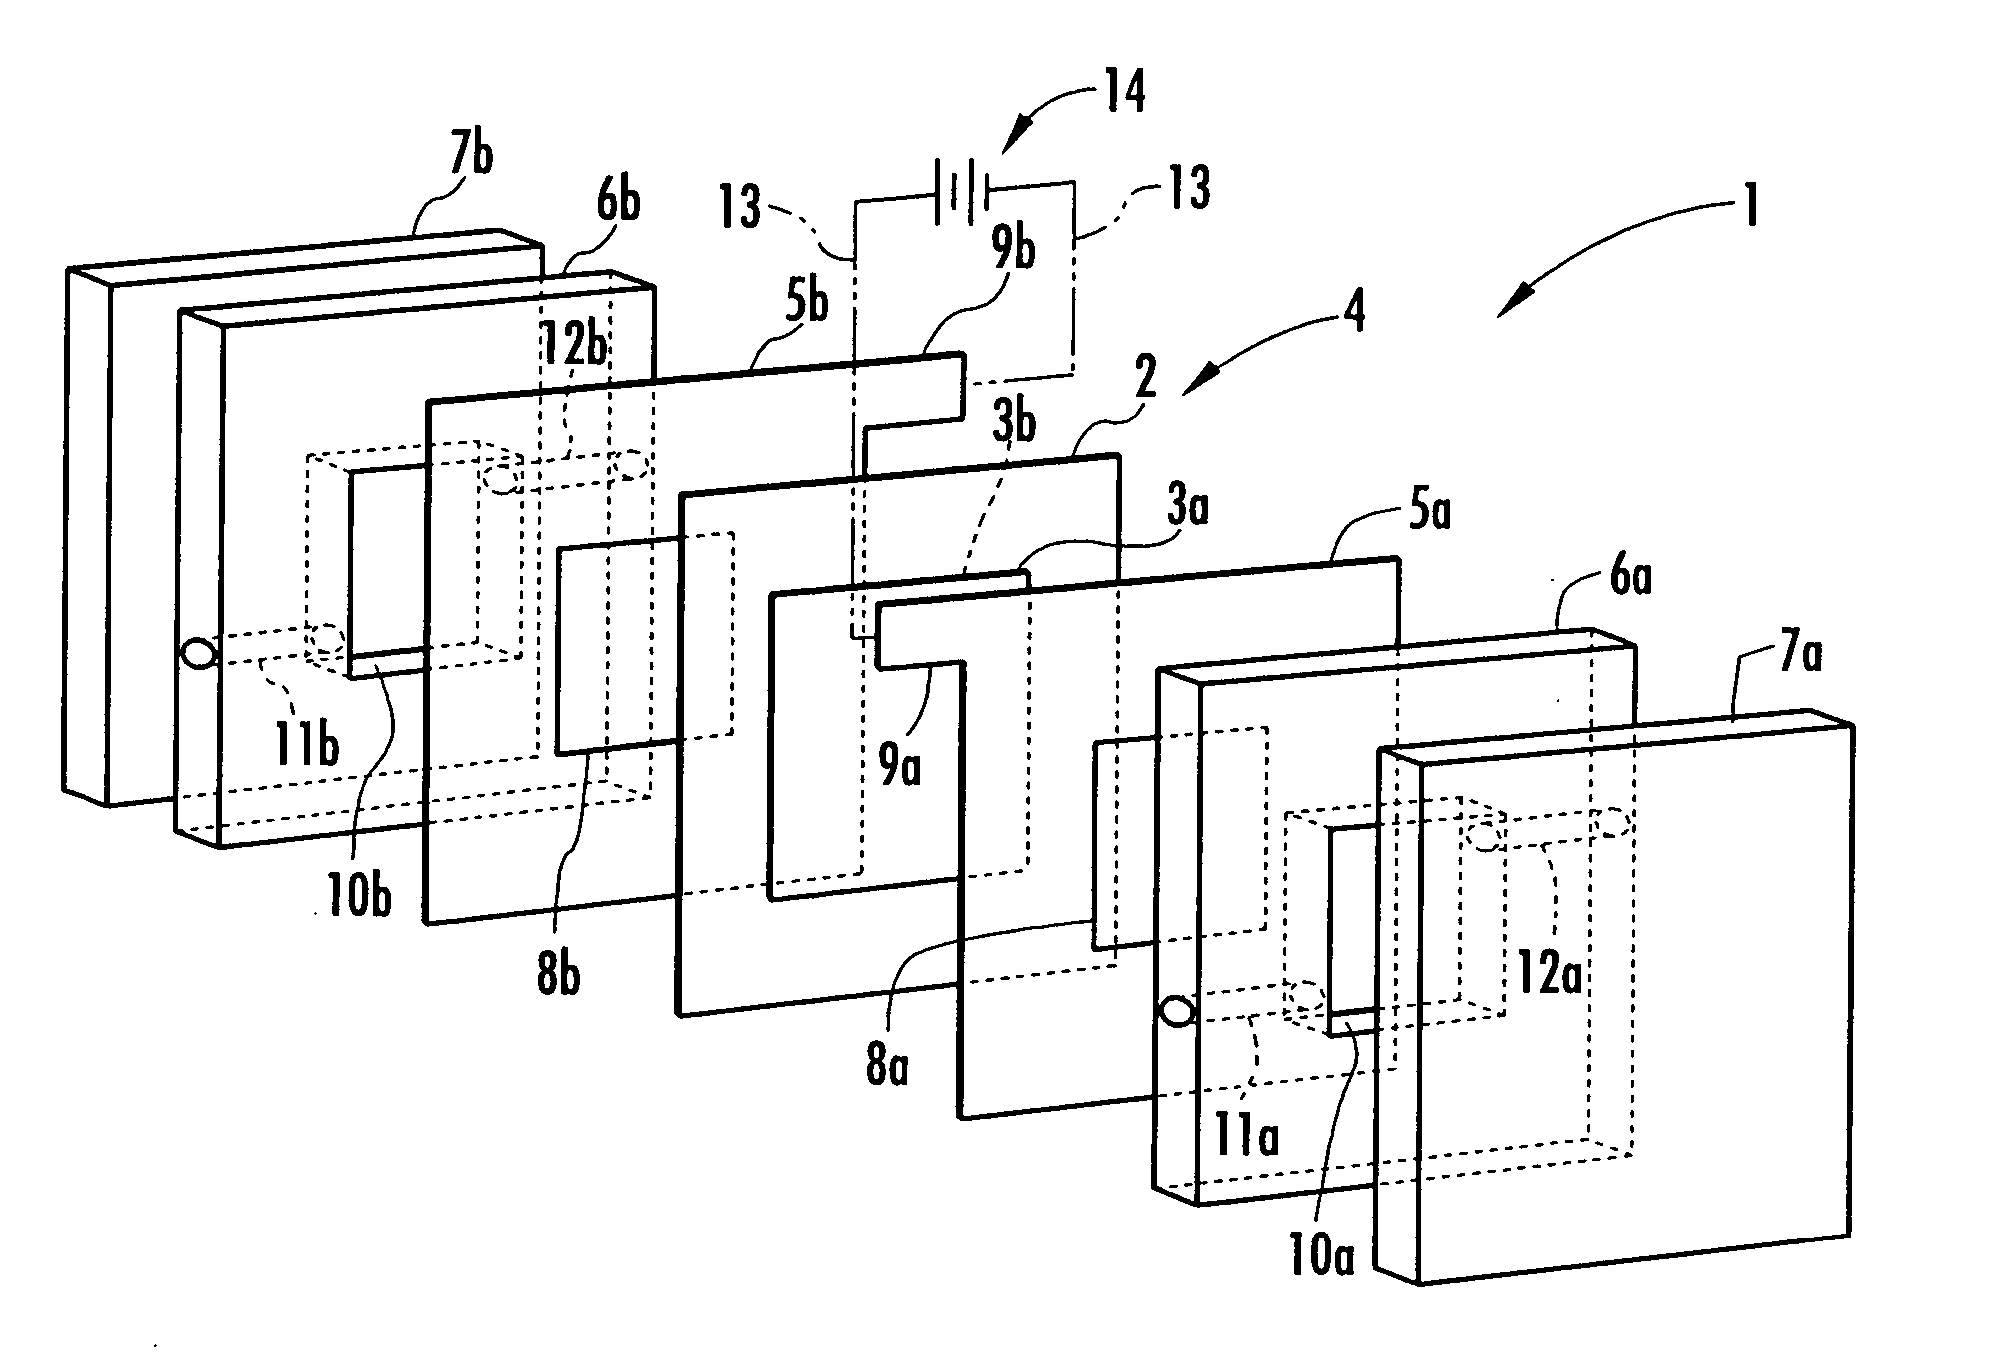 Electrolysis vessel and apparatus for generating electrolyzed water